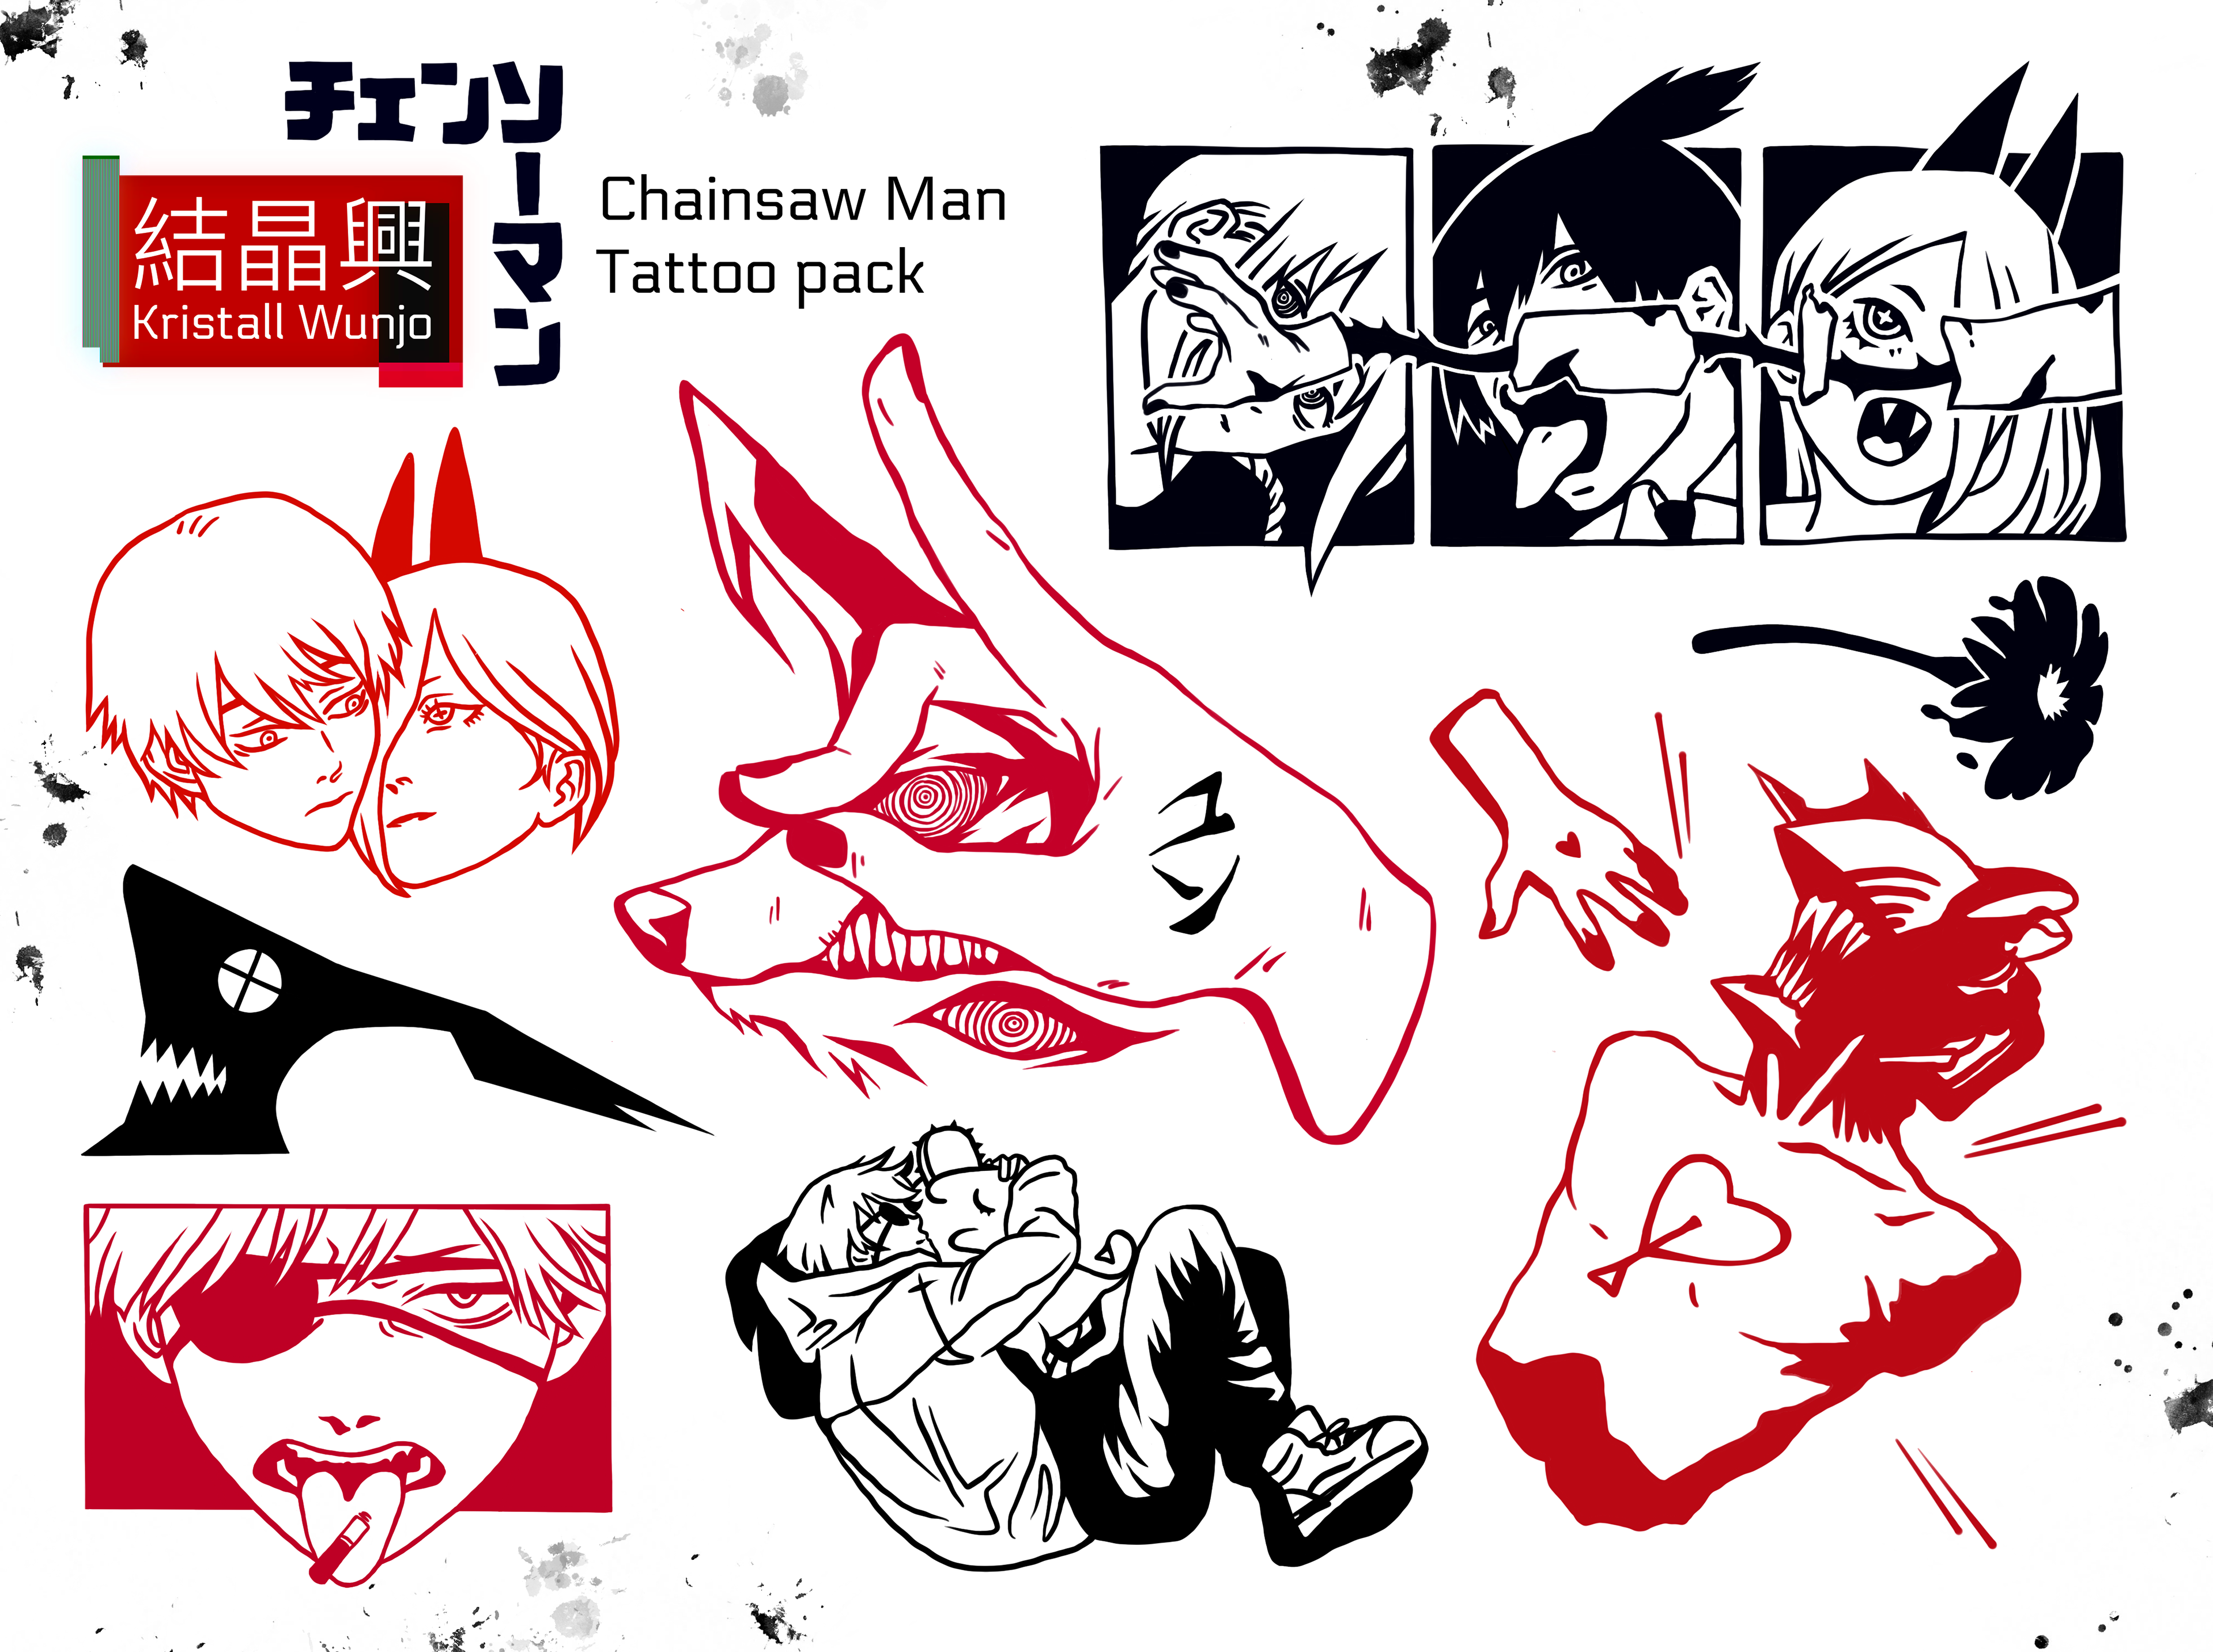 CHAINSAW MAN TATTOO PACK on Behance